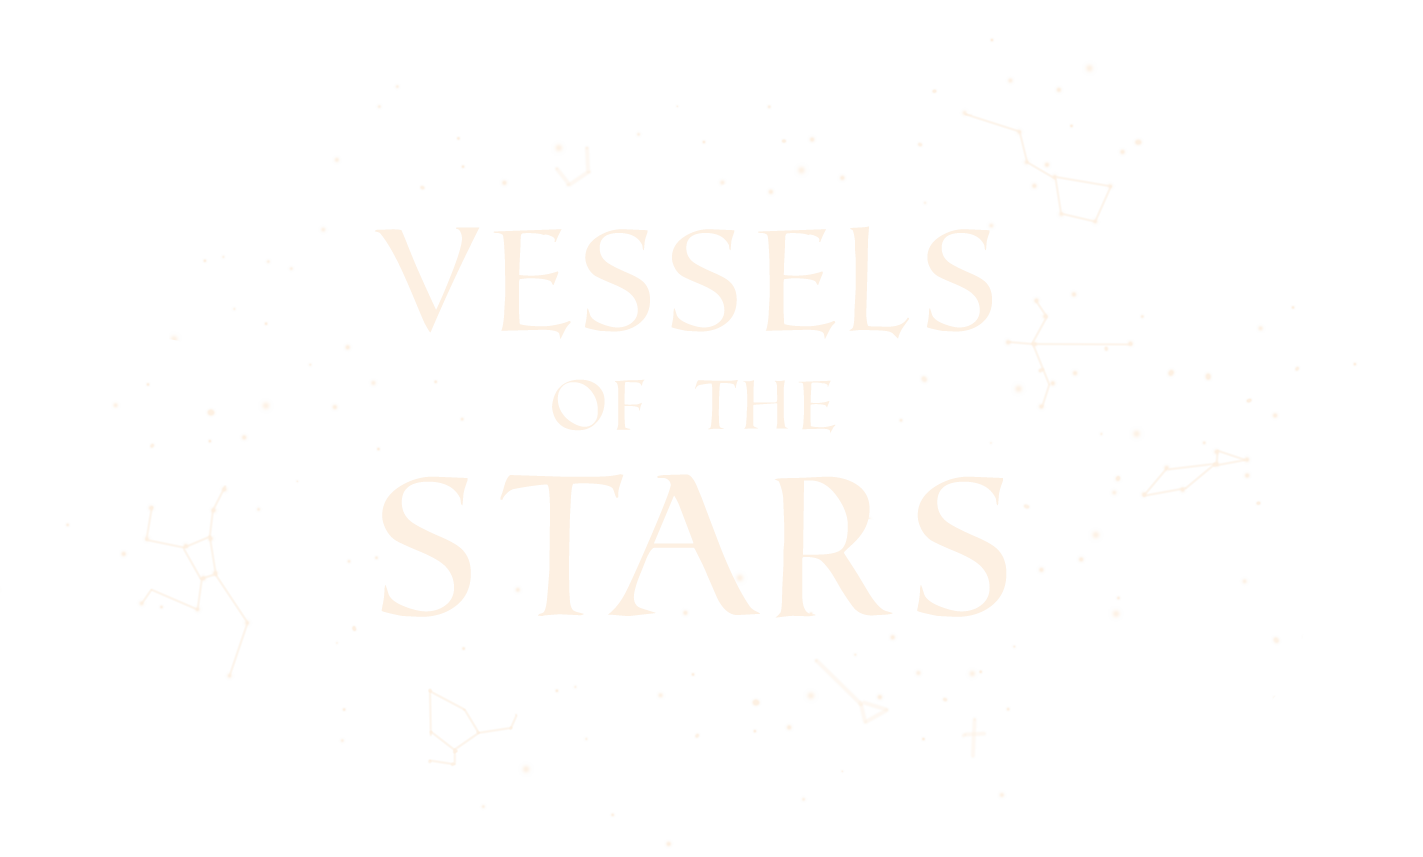 Vessels of the Stars